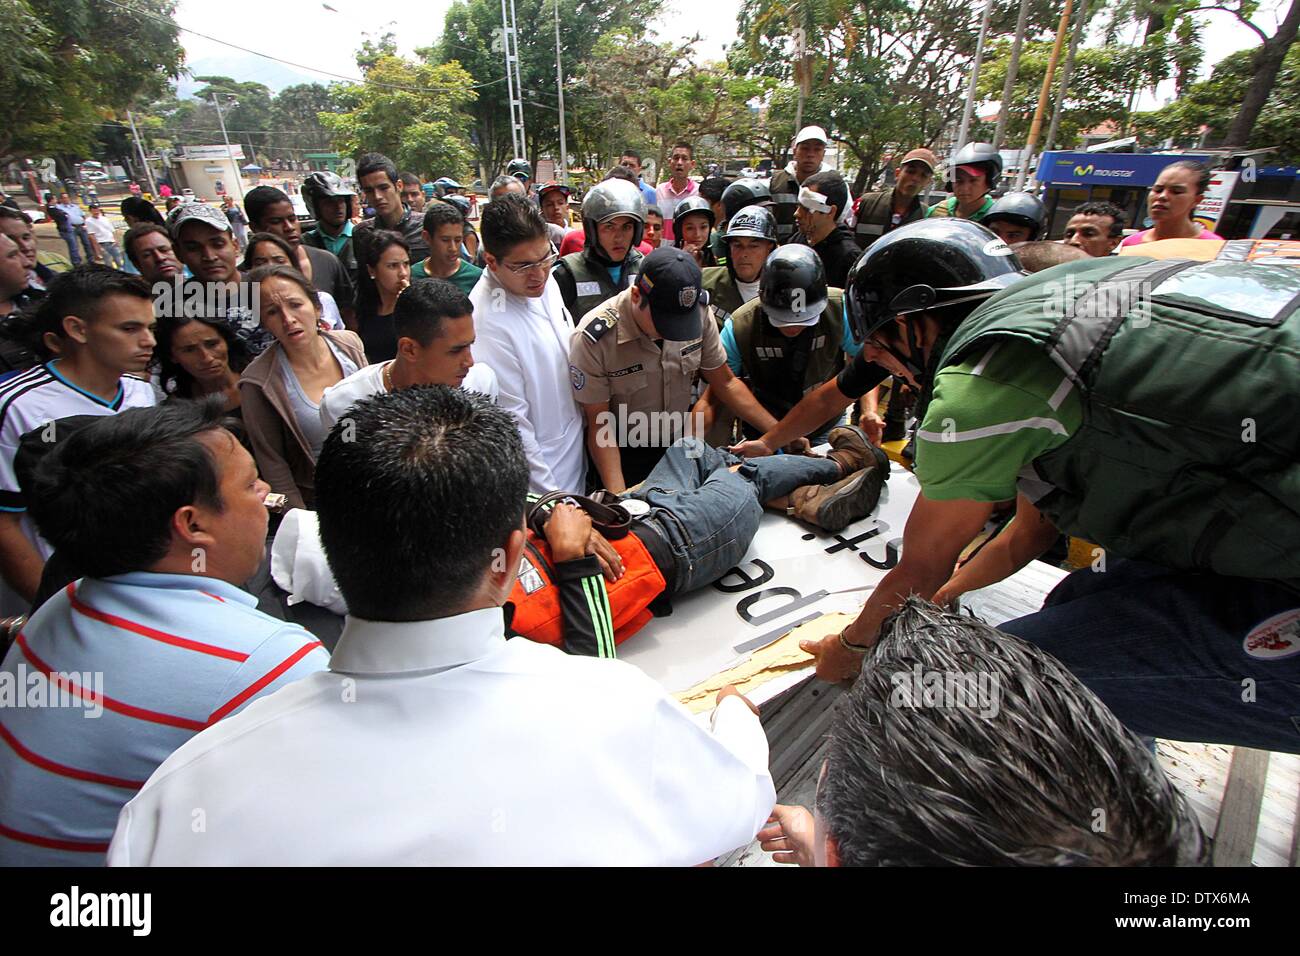 Tachira, Venezuela. 24th Feb, 2014. An injured motorcyclist is moved after the clashes between students and members of the National Bolivarian Guard in San Cristobal, Tachira state, Venezuela, on Feb. 24, 2014. Credit:  George Castro/Xinhua/Alamy Live News Stock Photo